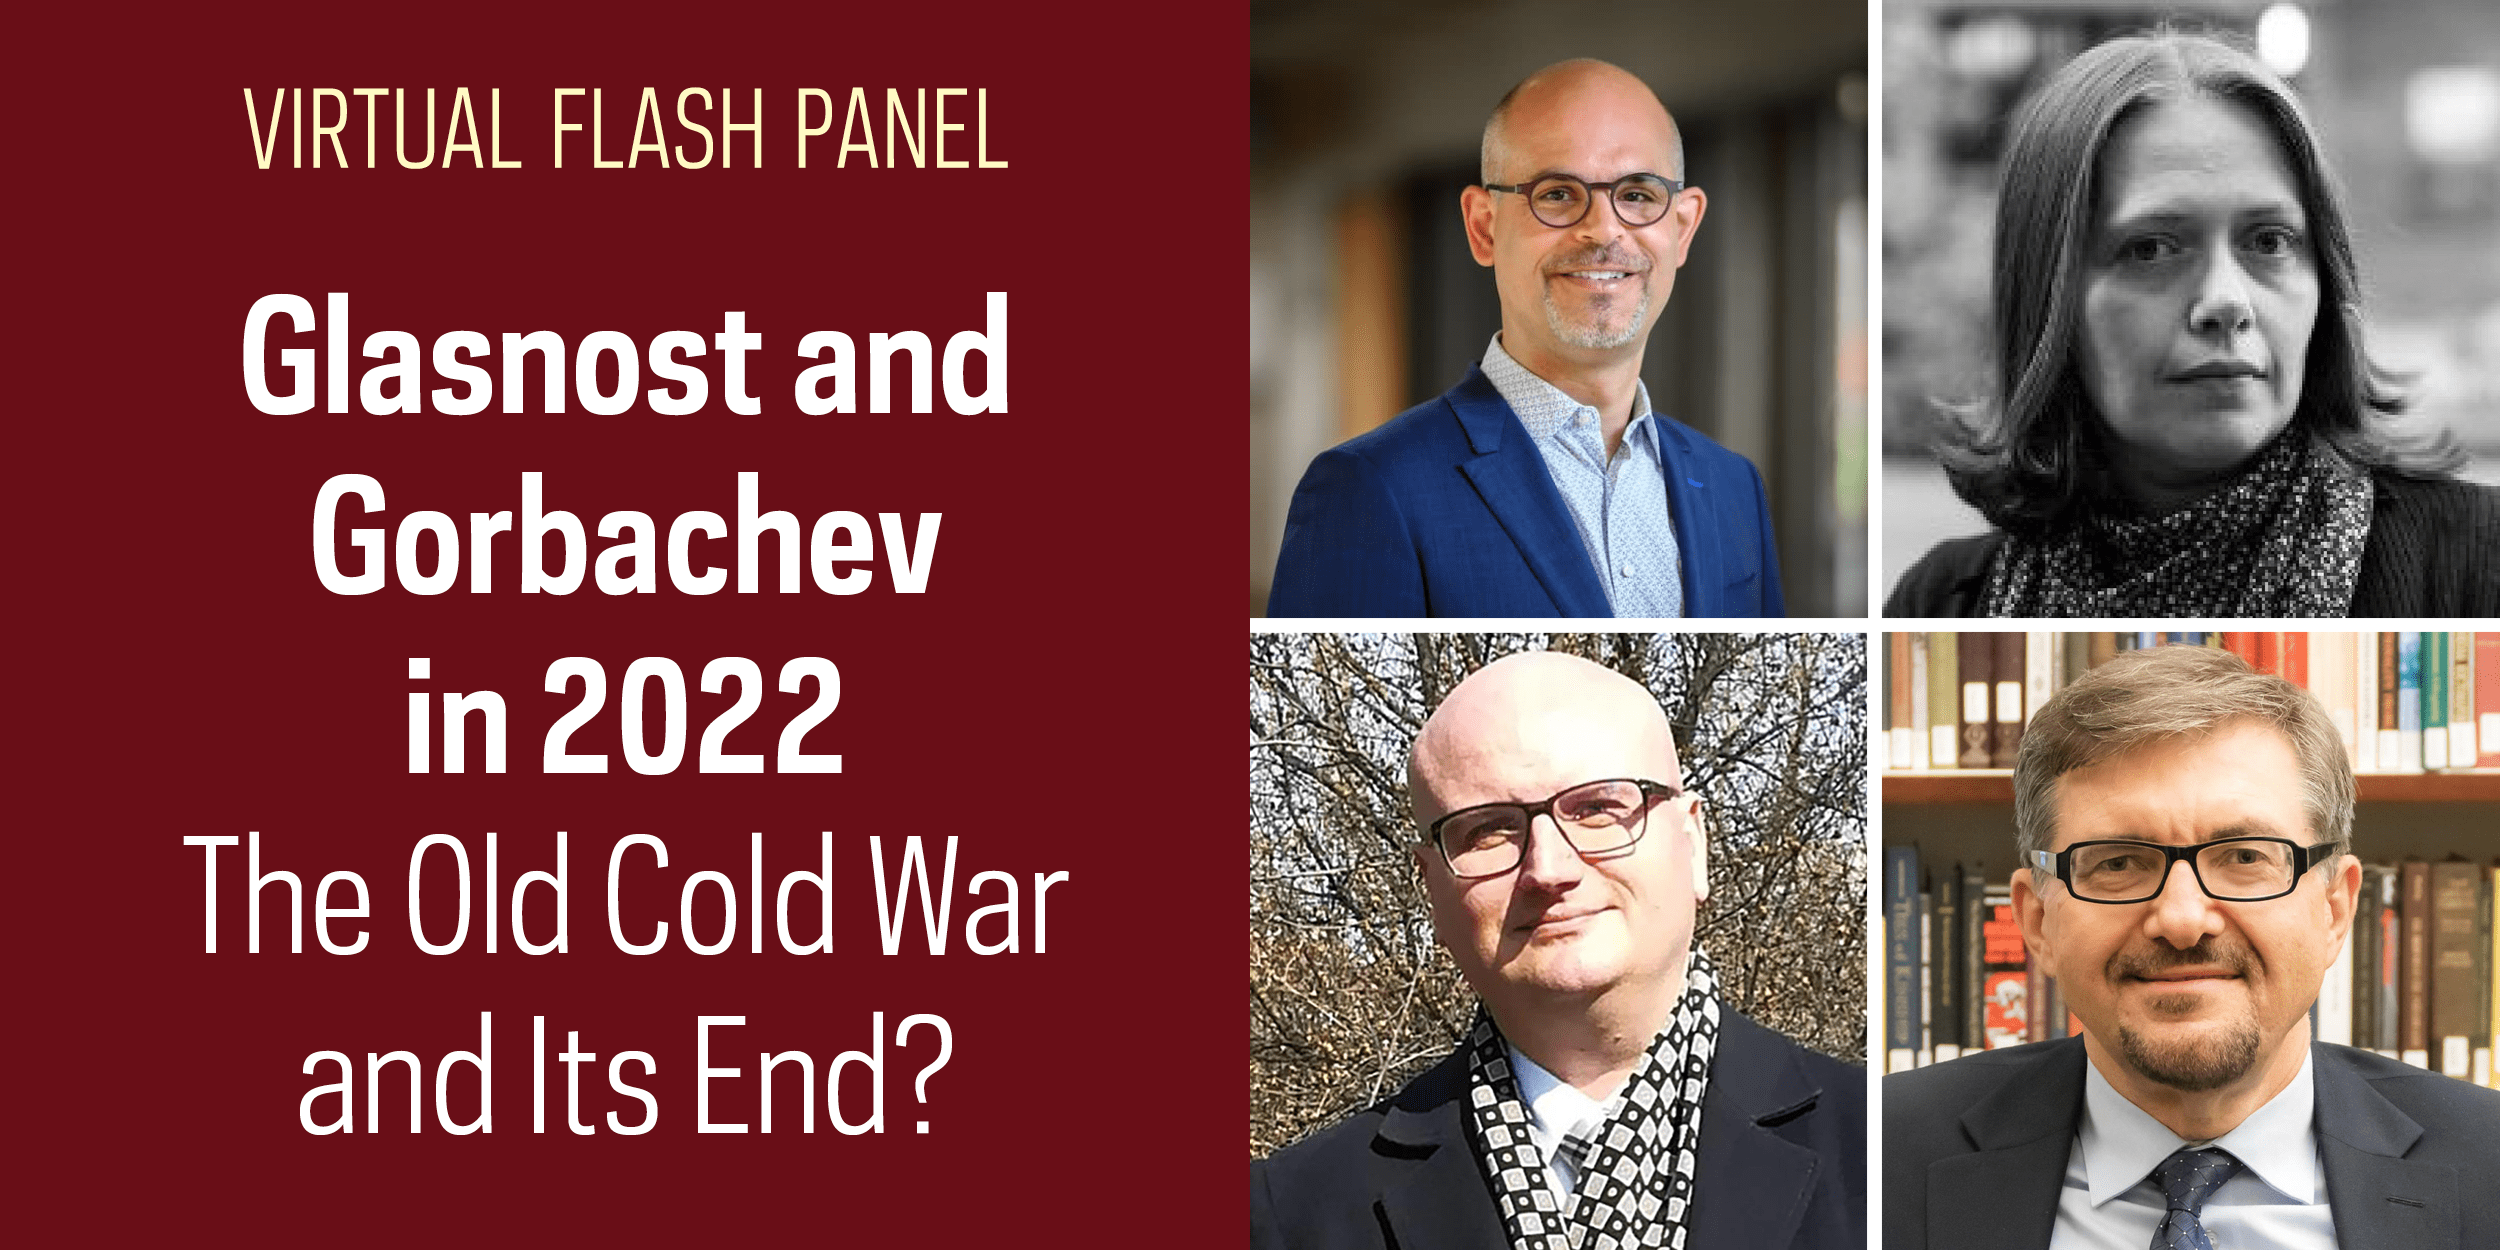 Flash Panel: “Glasnost and Gorbachev in 2022: The Old Cold War and Its End?”